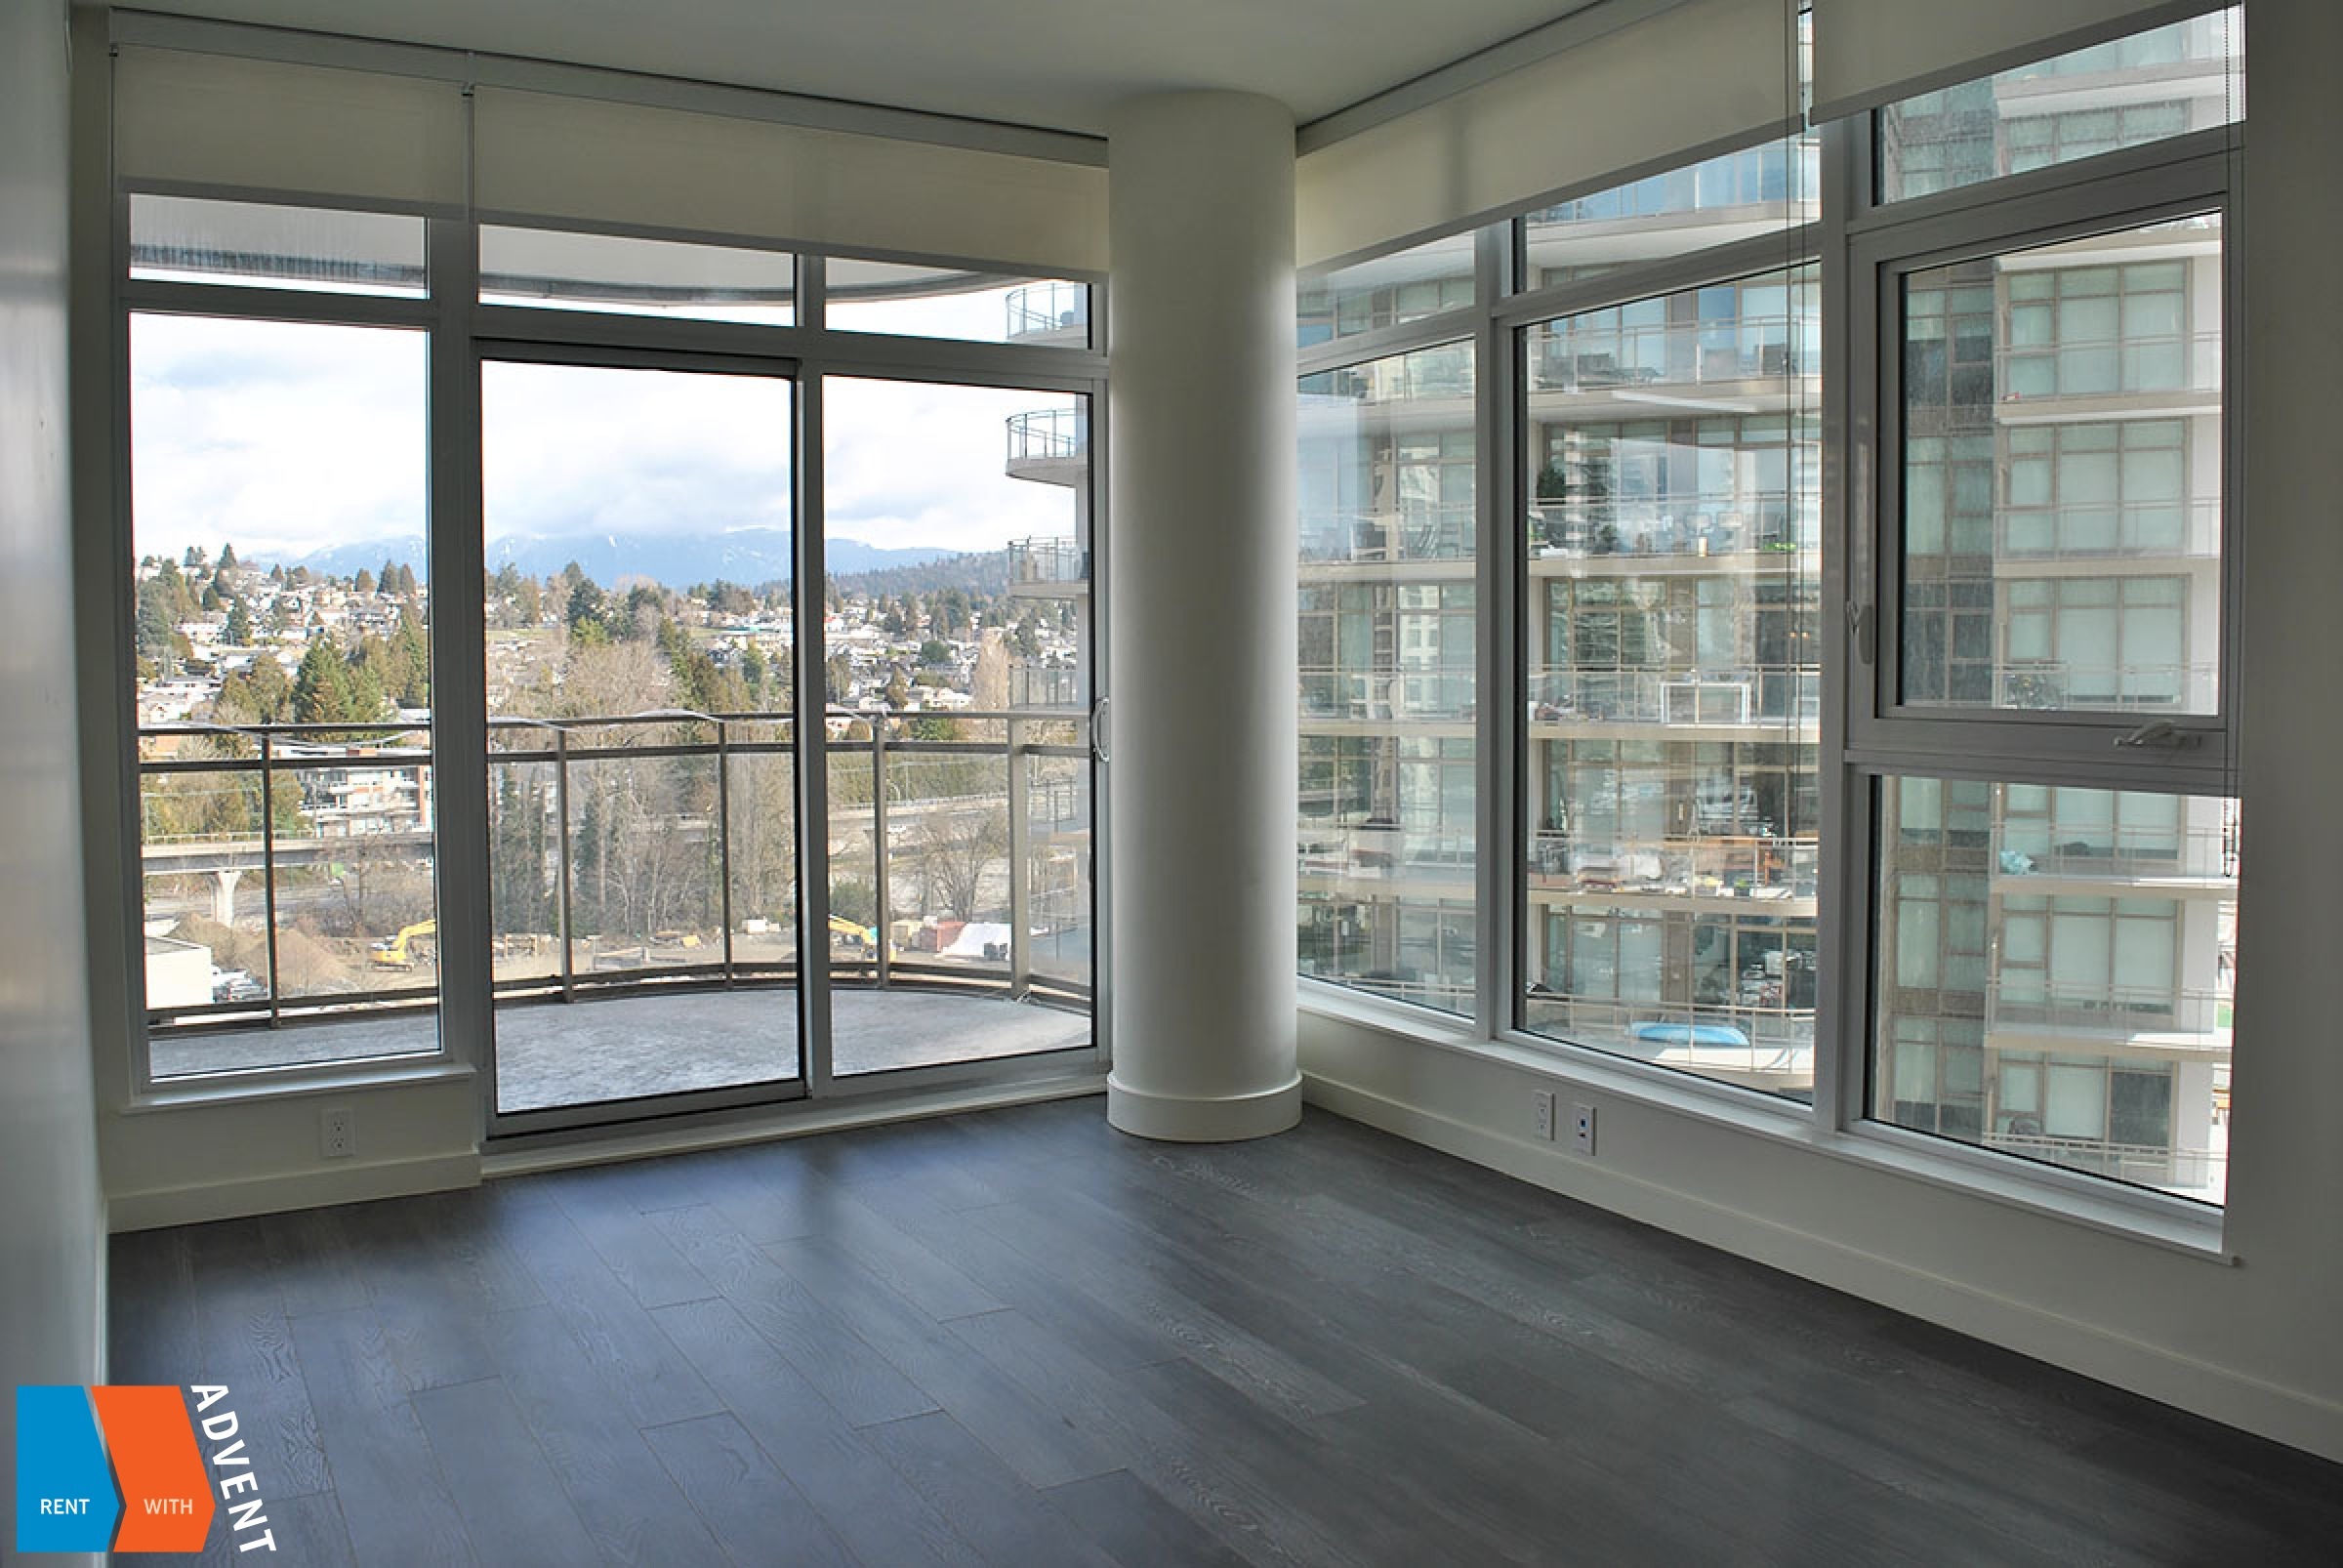 11th Floor Mountain View 1 Bed & Den Apartment For Rent at Etoile in Brentwood, Burnaby. 1103 - 5311 Goring Street, Burnaby, BC, Canada.